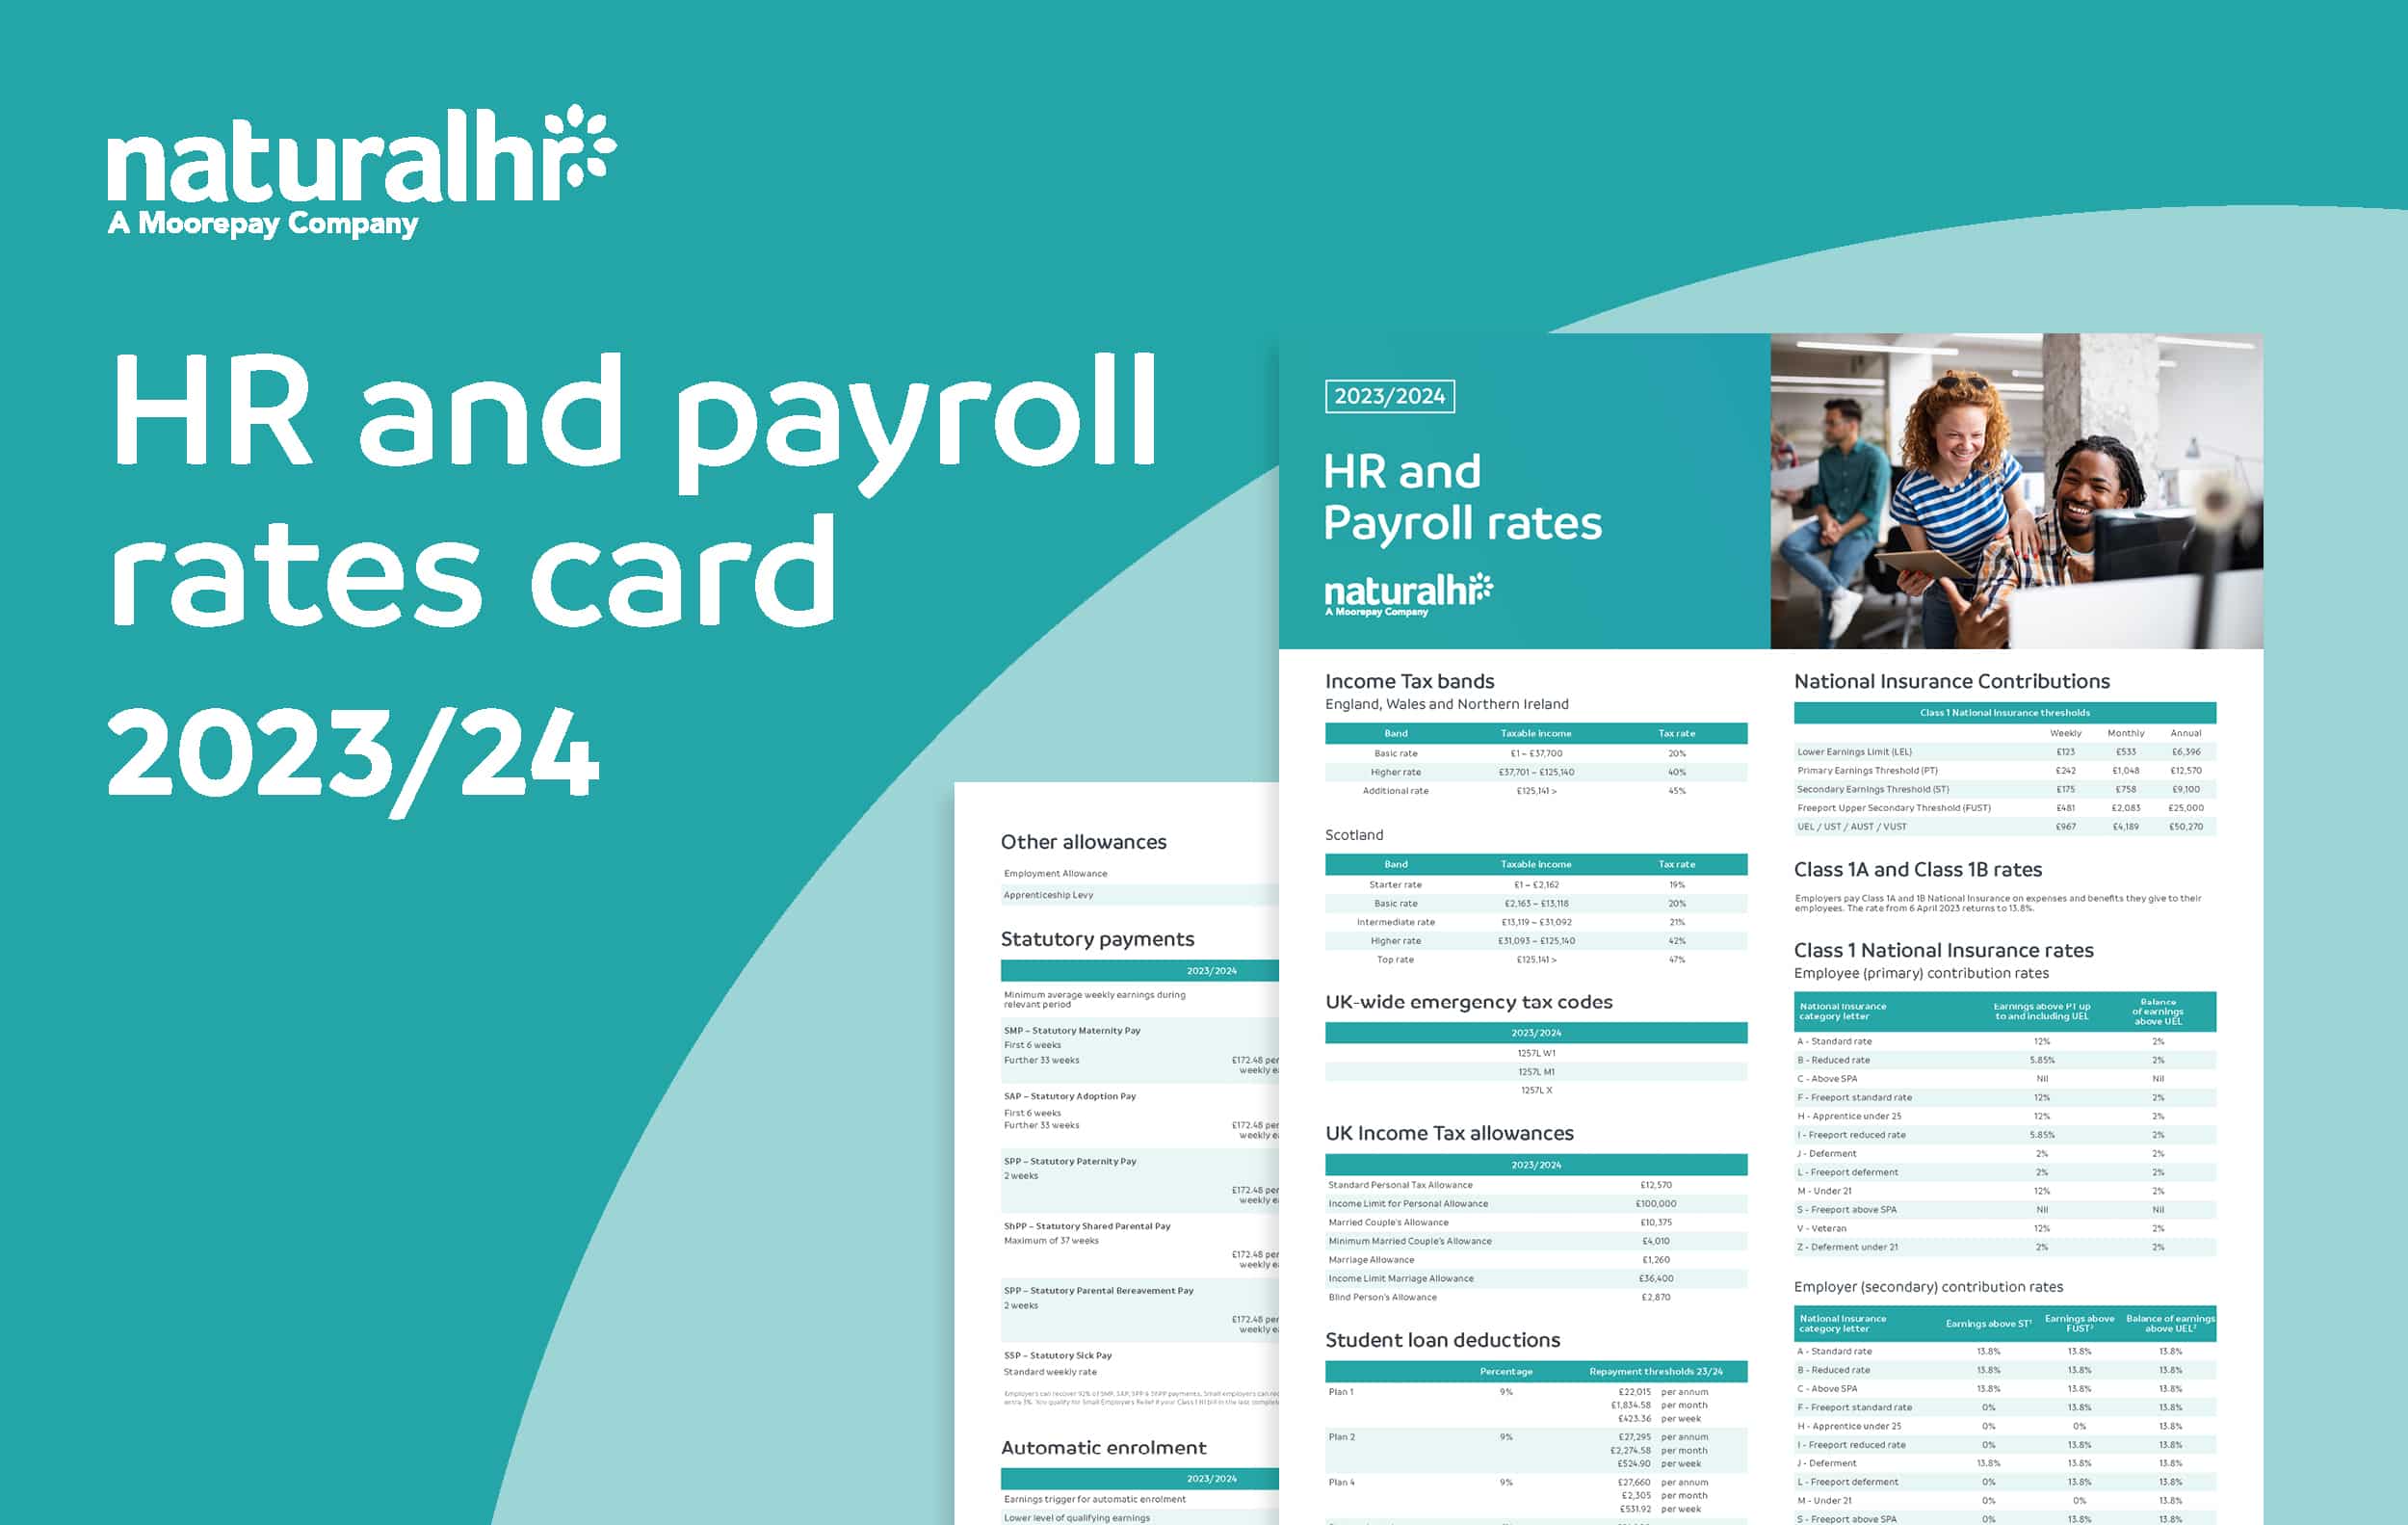 HR and payroll rates 2023/24 banner